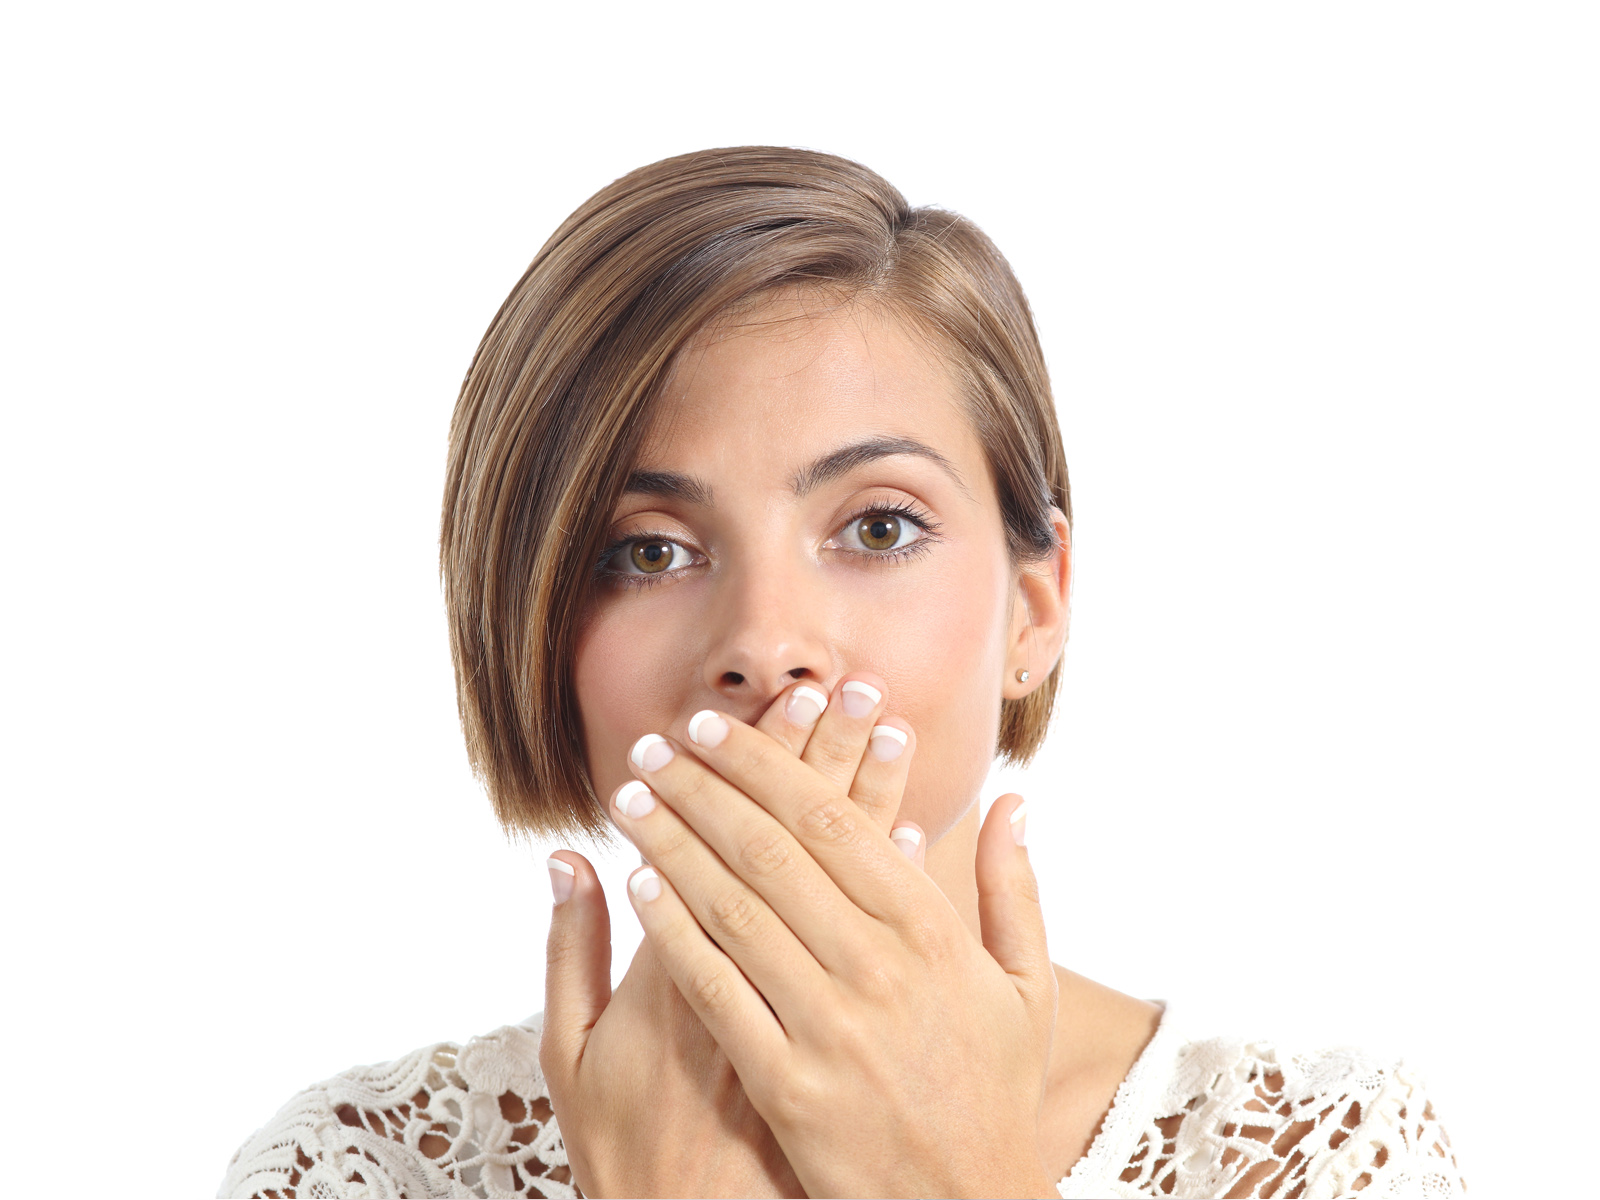 What is halitosis?